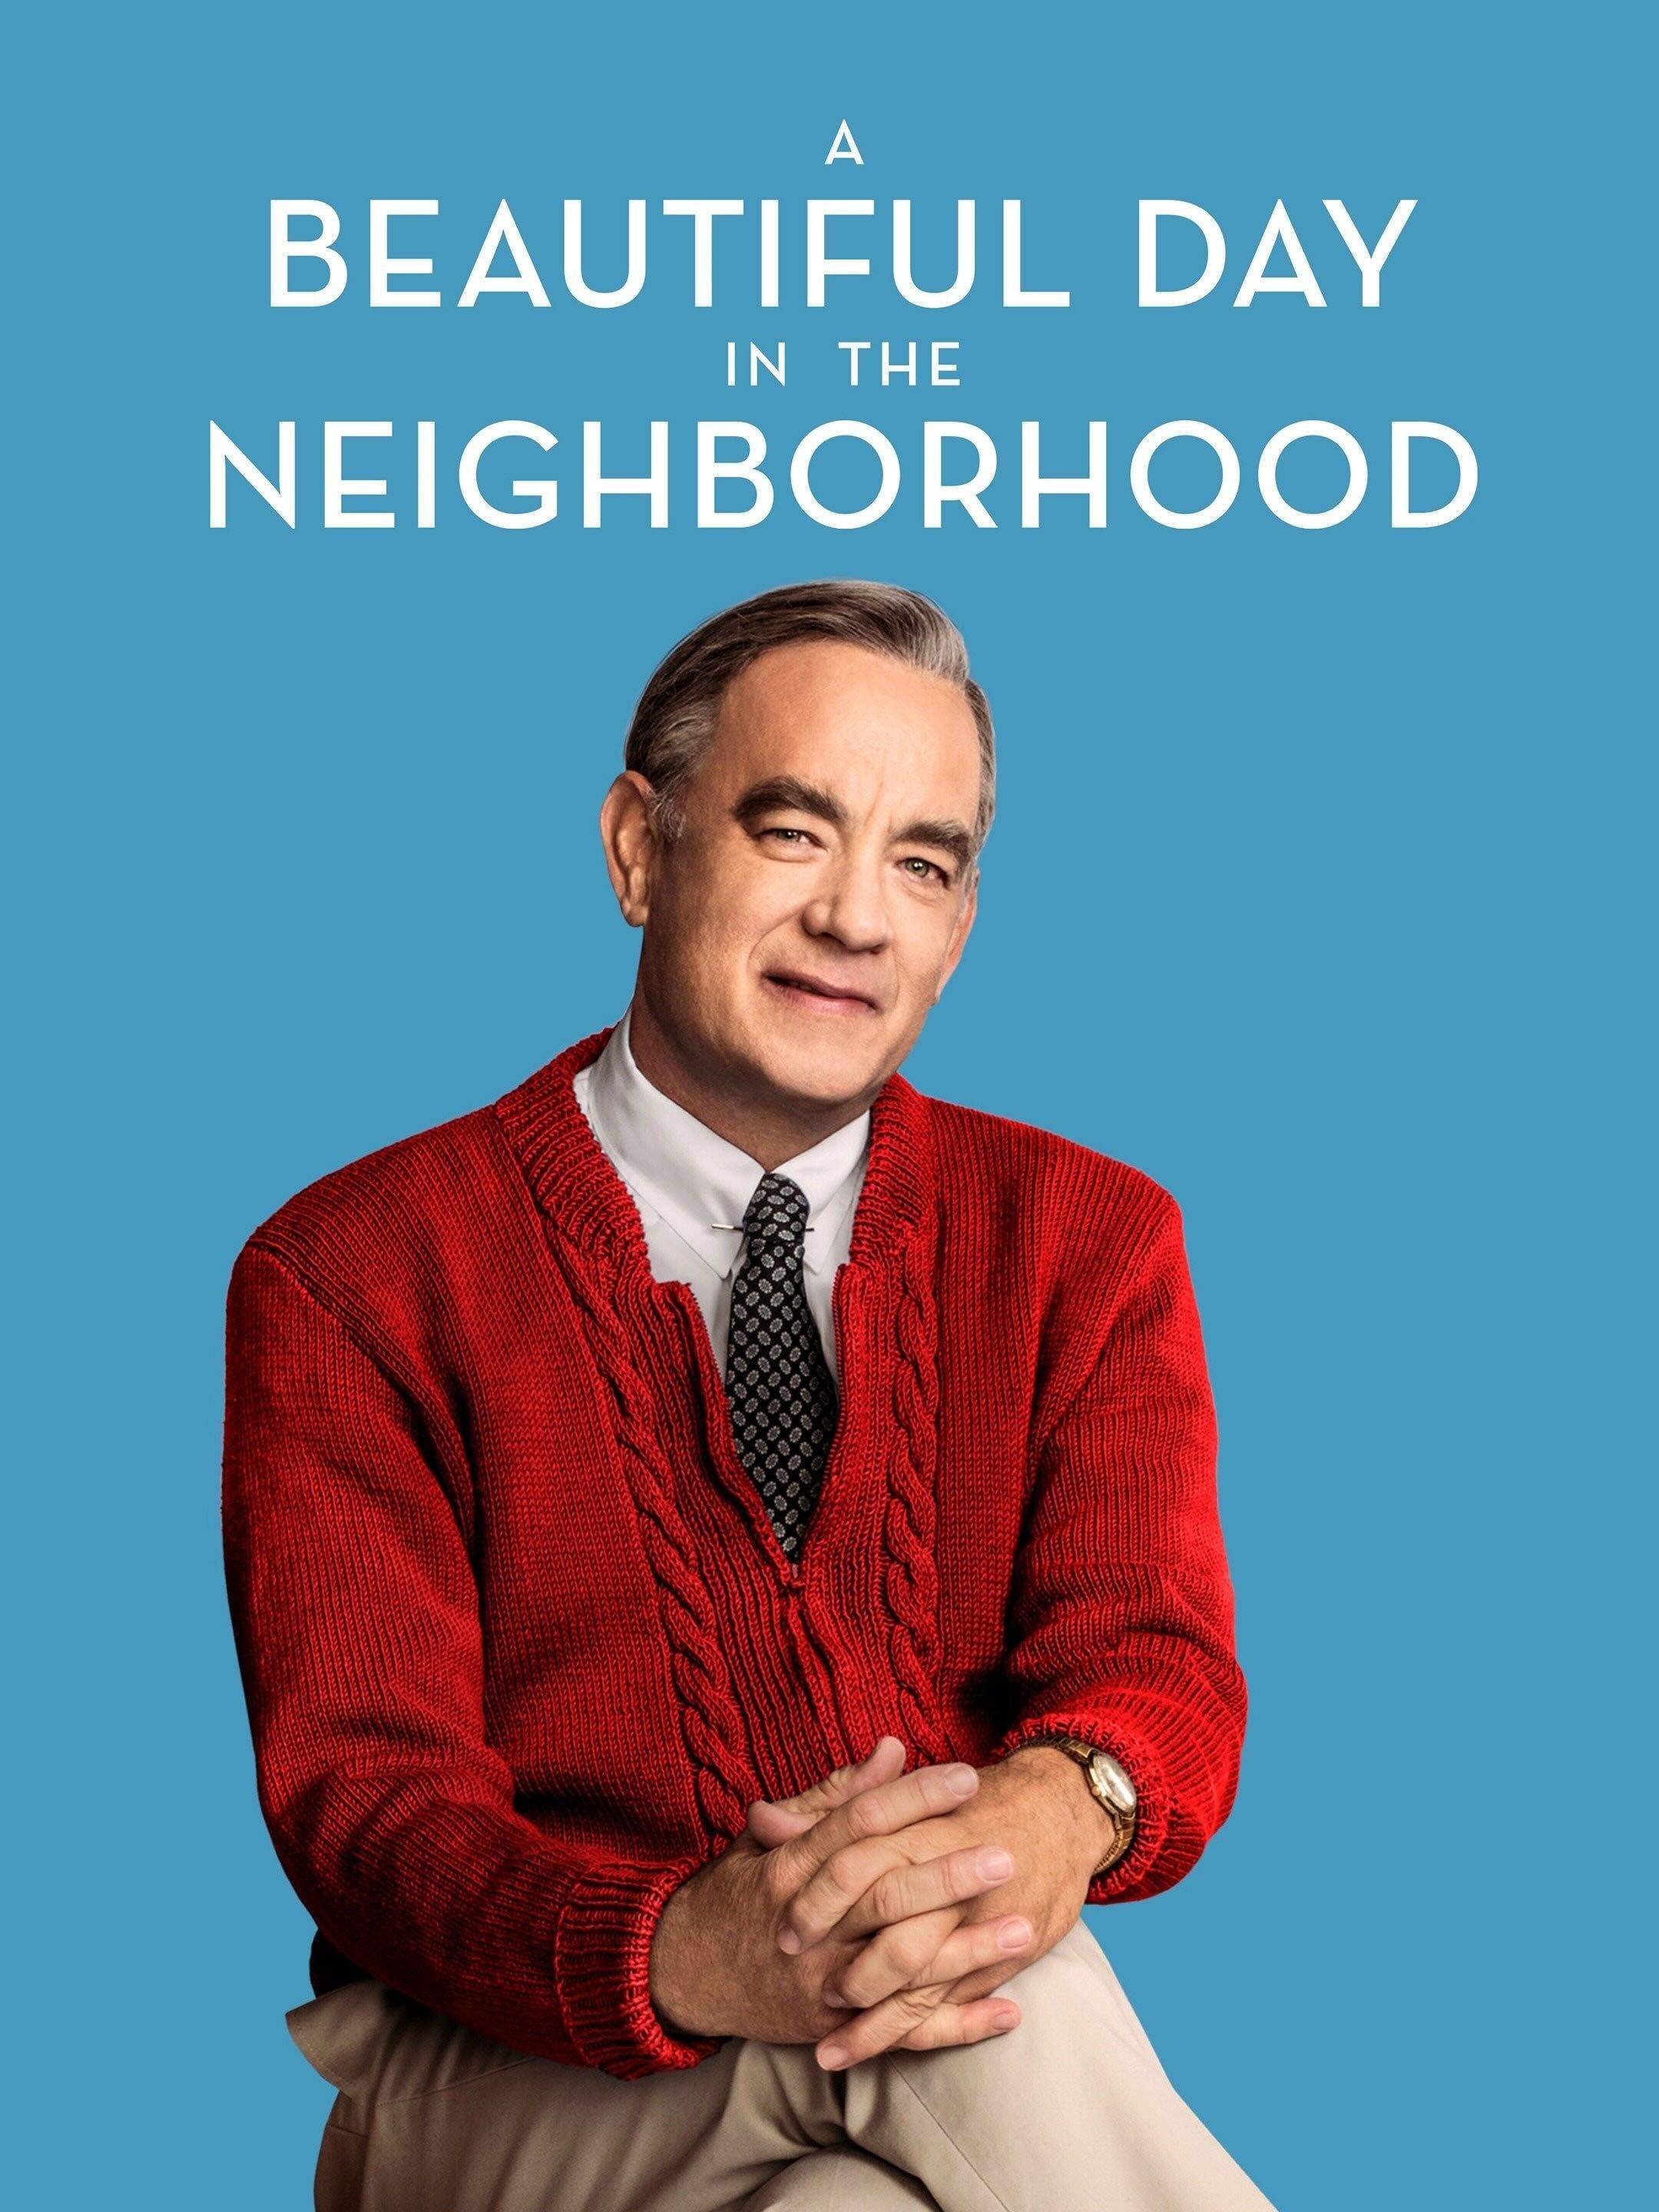 Tom Hanks as Fred Rogers wearing a red sweater smiling toward the camera in Beautiful Day in the Neighborhood